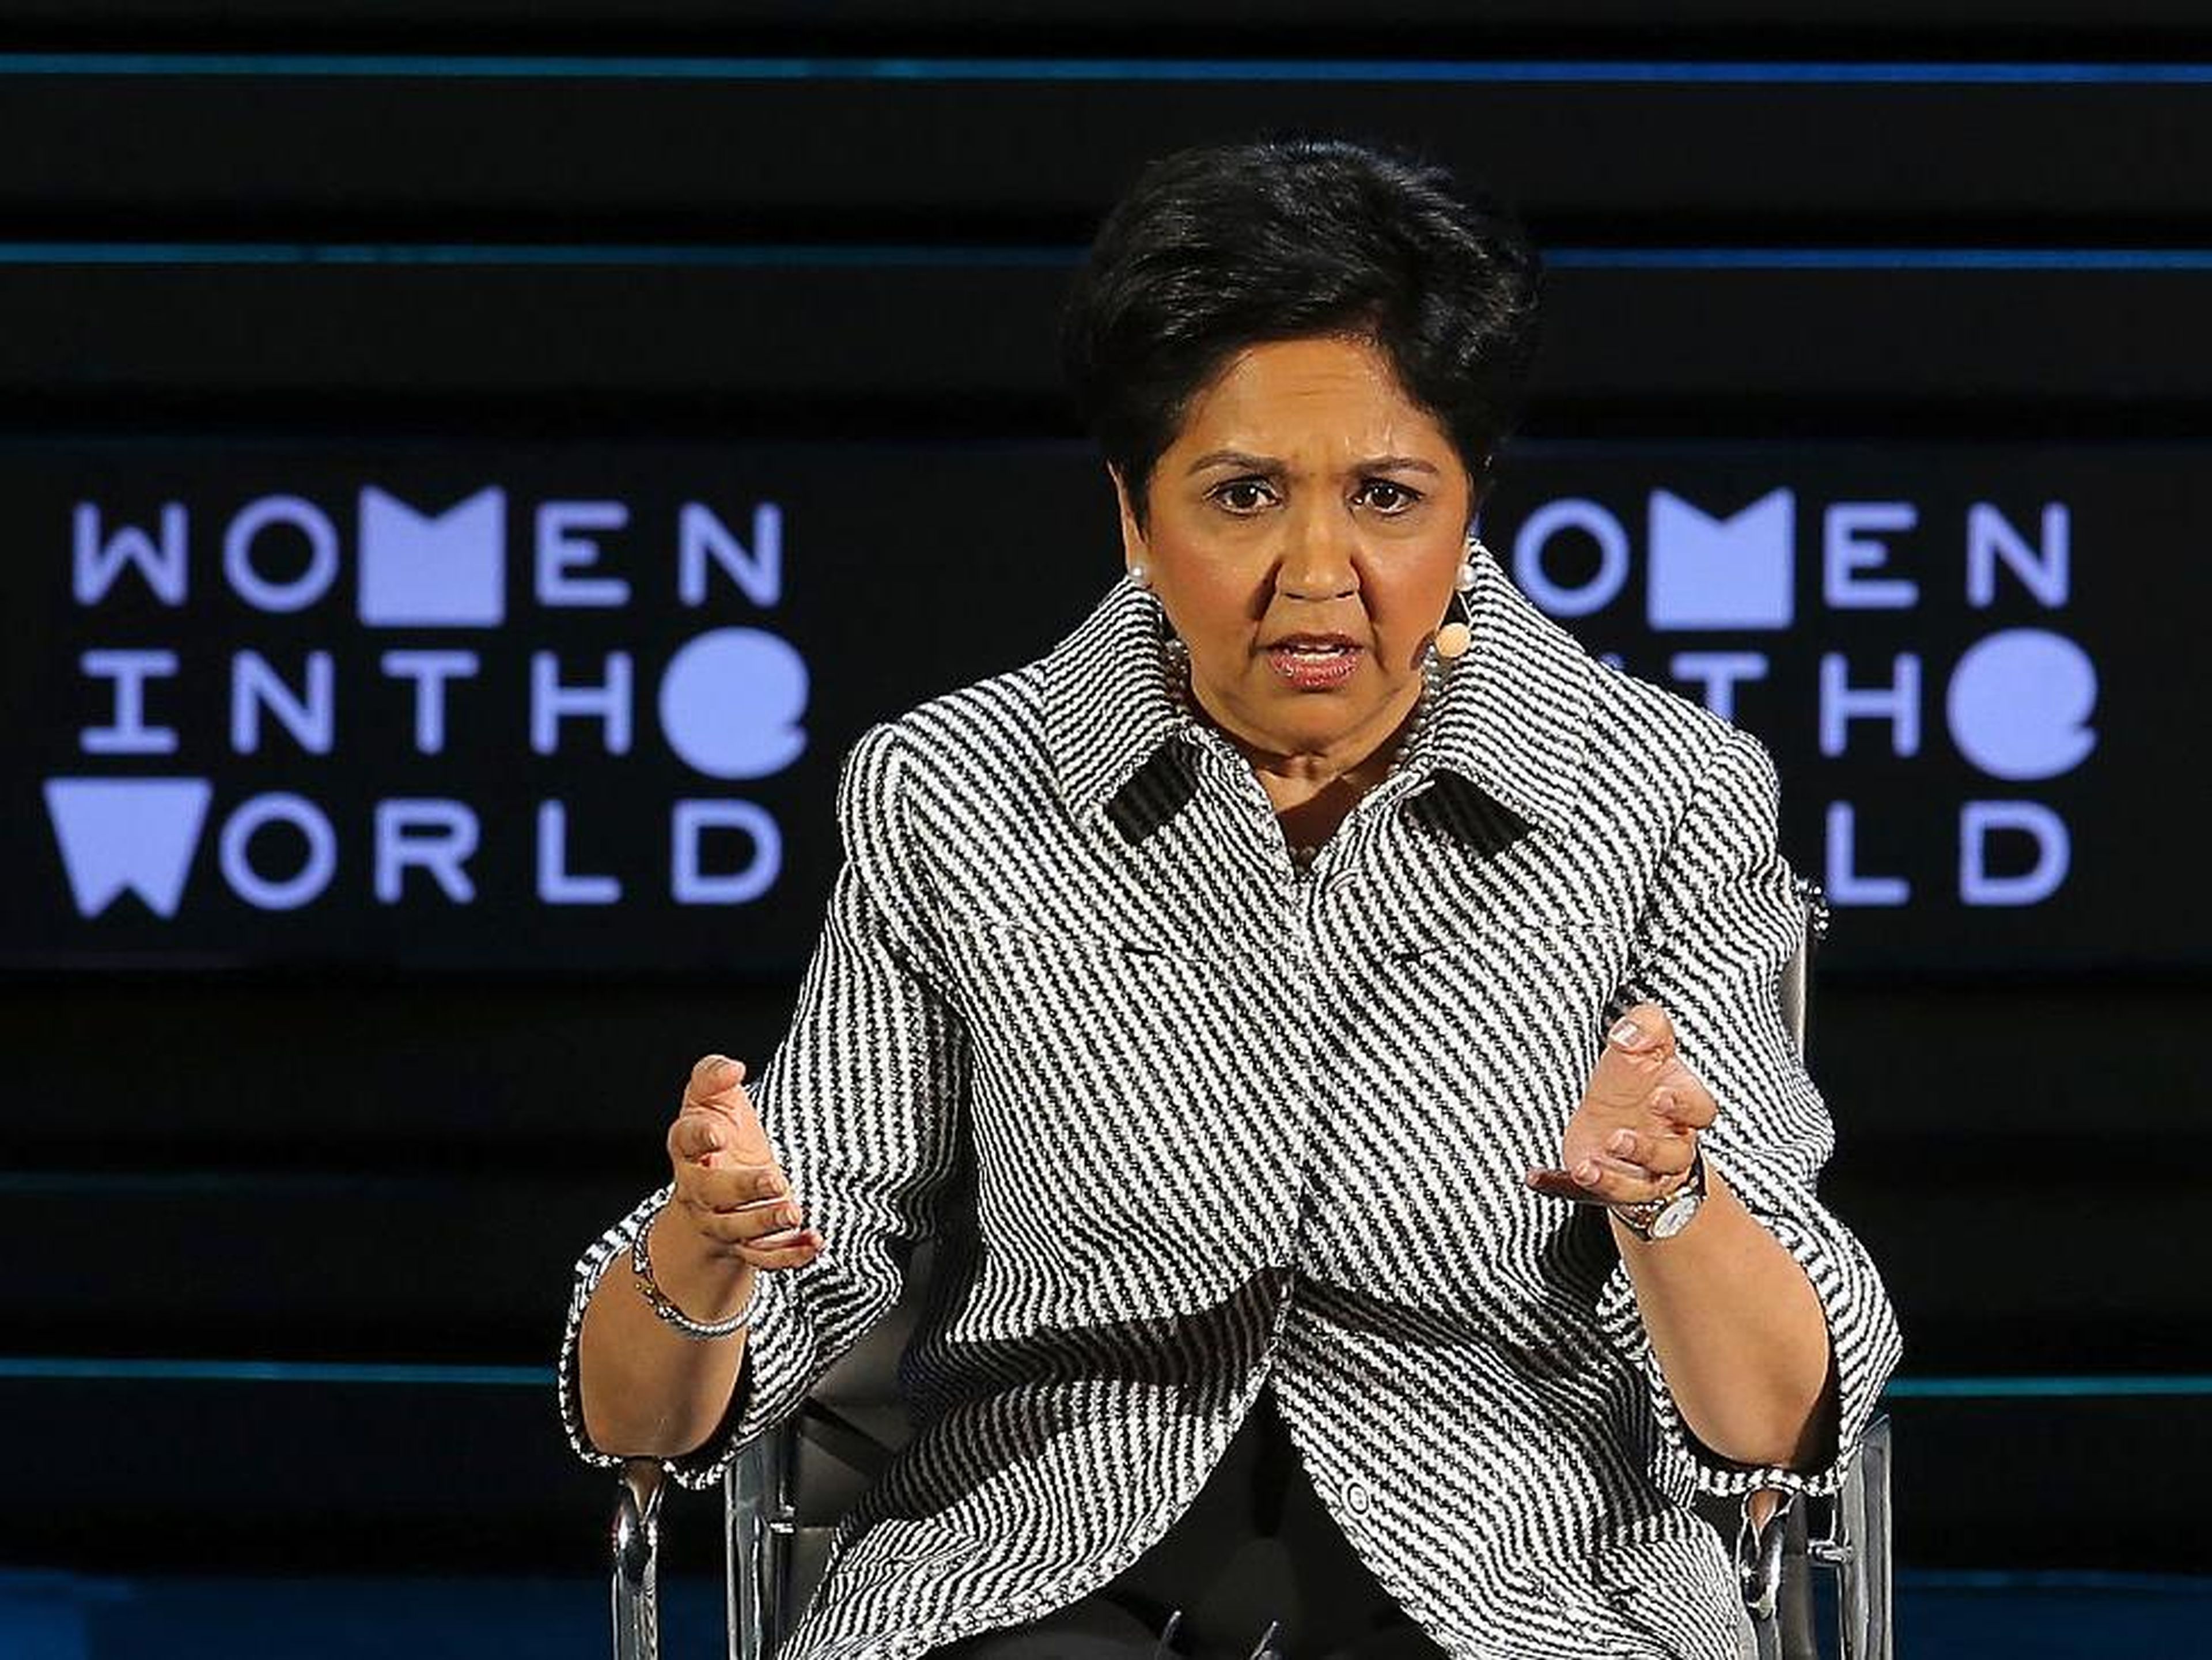 Meanwhile, PepsiCo chairwoman Indra Nooyi wakes up as early as 4 a.m. She told Fortune: "They say sleep is a gift that God gives you ... that's one gift I was never given."